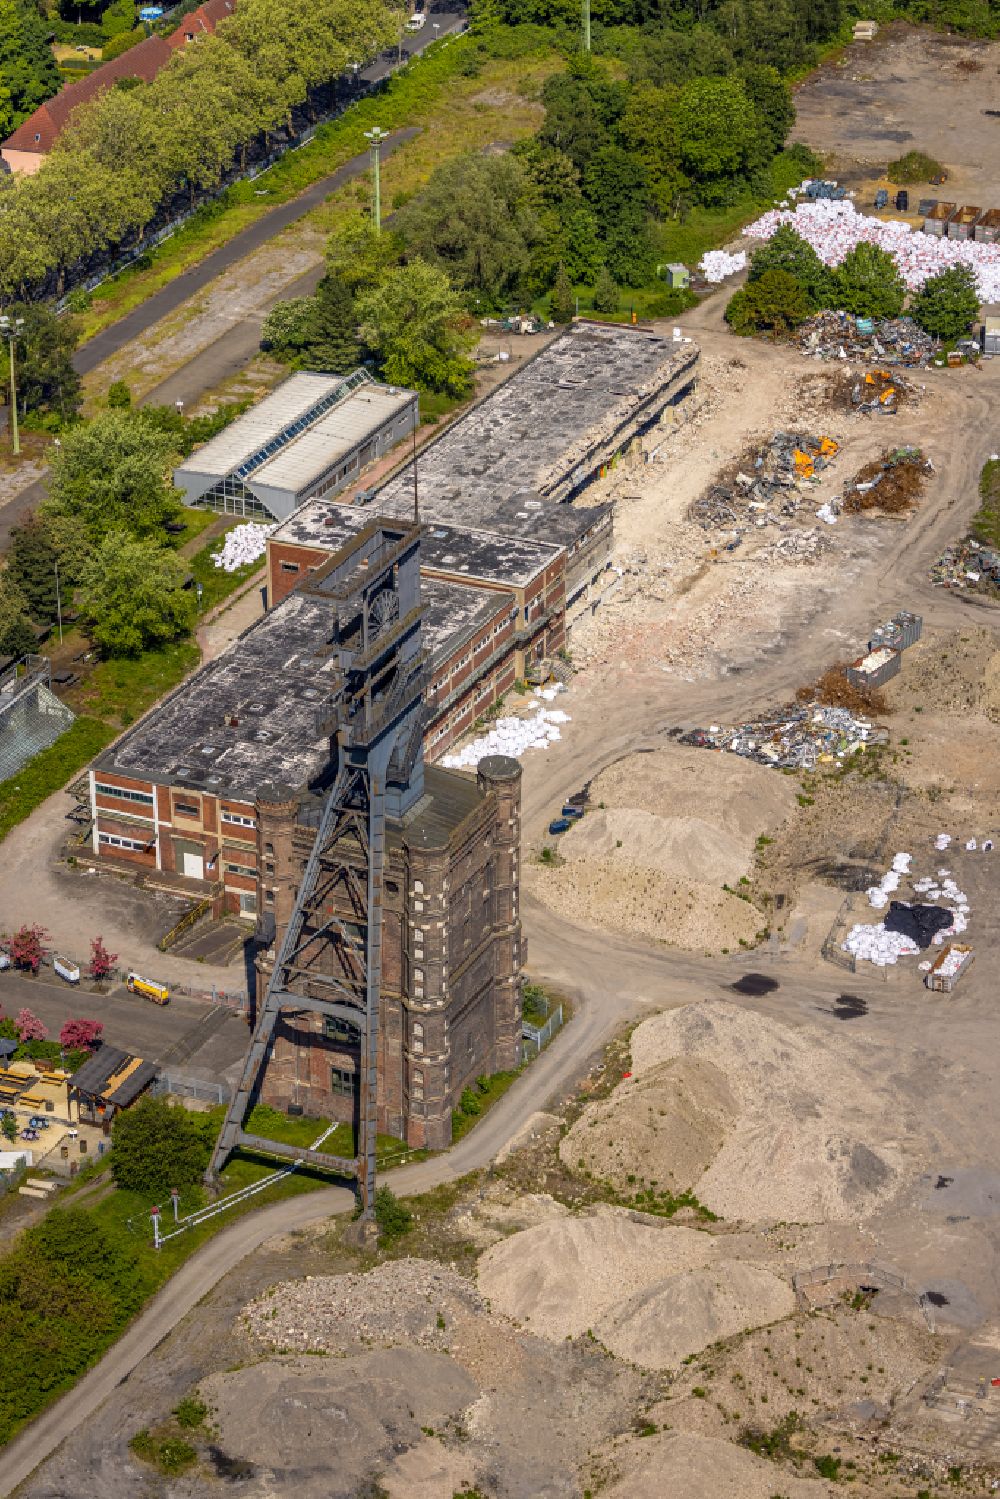 Aerial image Bottrop - Demolition and dismantling of the conveyor systems and mining shaft systems on the headframe of the mine and colliery Zeche - Schachtanlage Prosper-Haniel II in the district Welheimer Mark in Bottrop at Ruhrgebiet in the state North Rhine-Westphalia, Germany